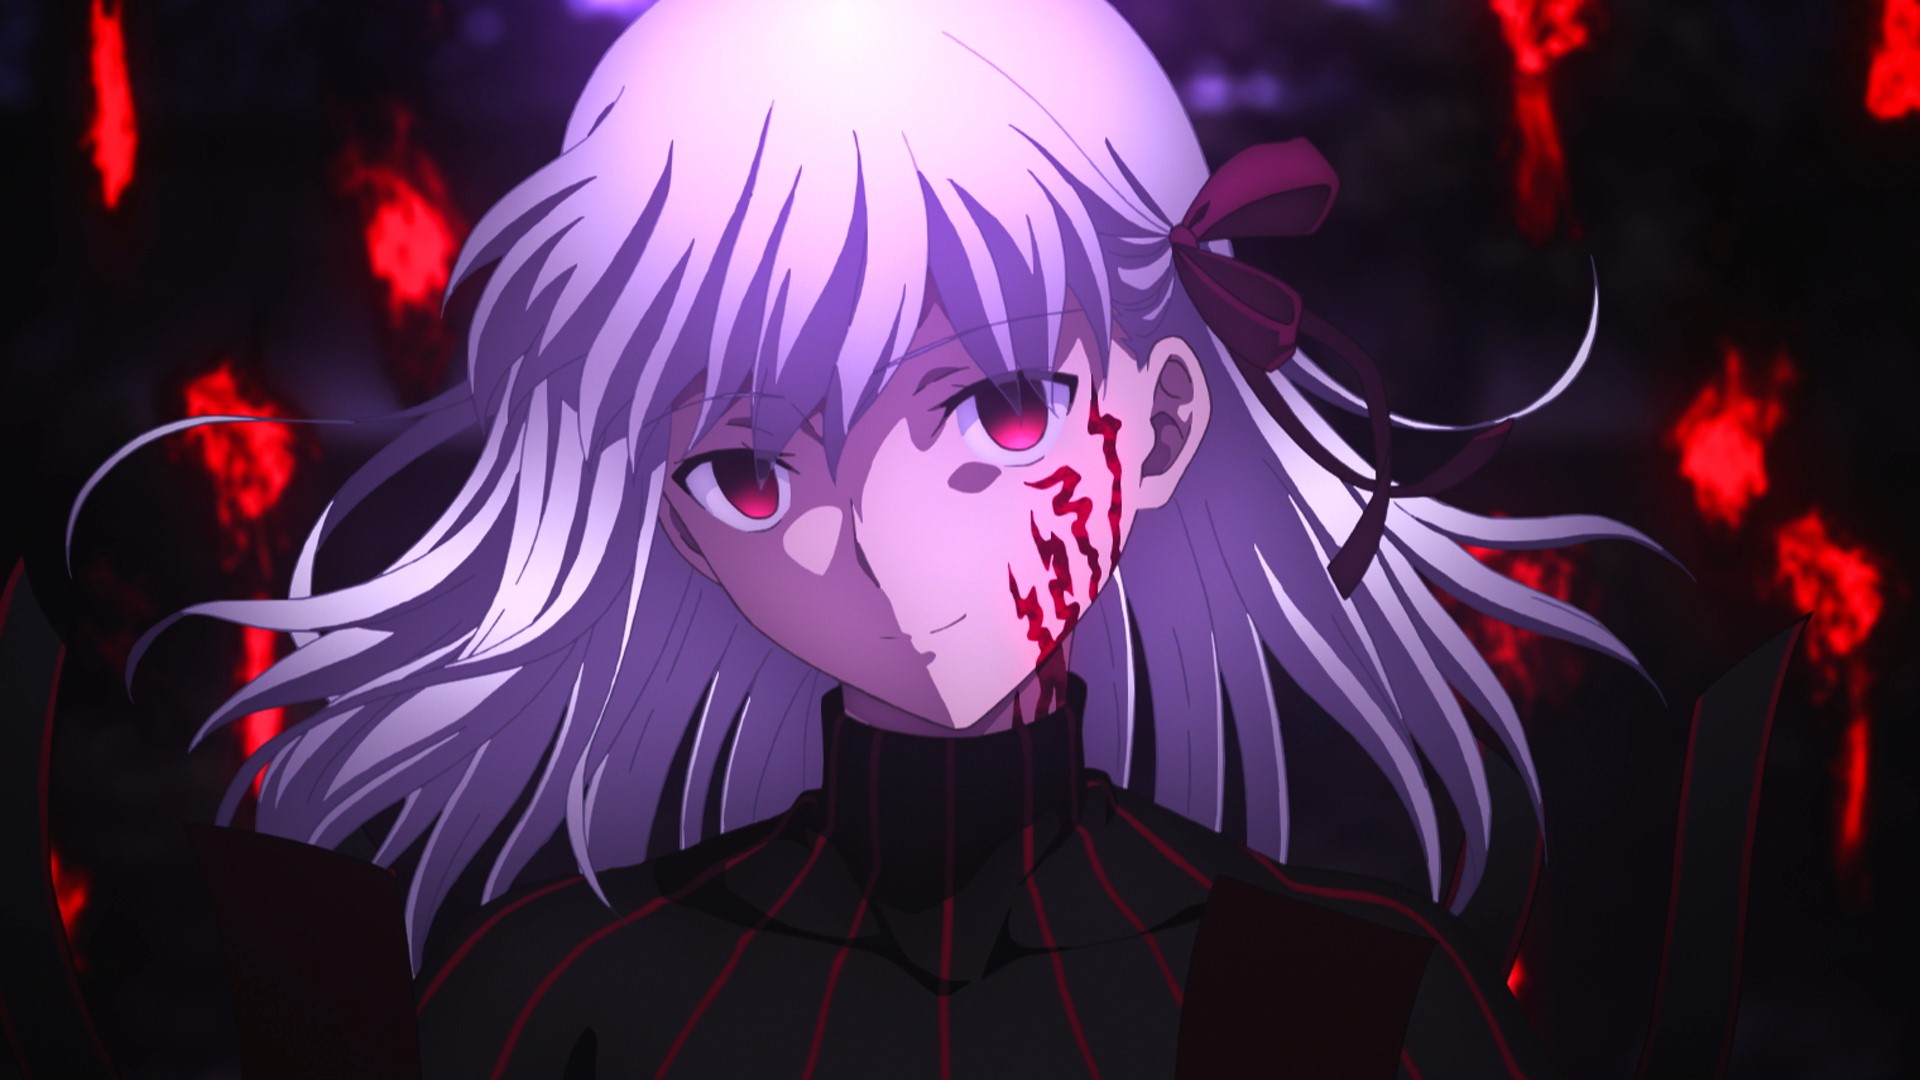 Beginner's Guide to Fate/Stay Night Version 3.0 : r/fatestaynight